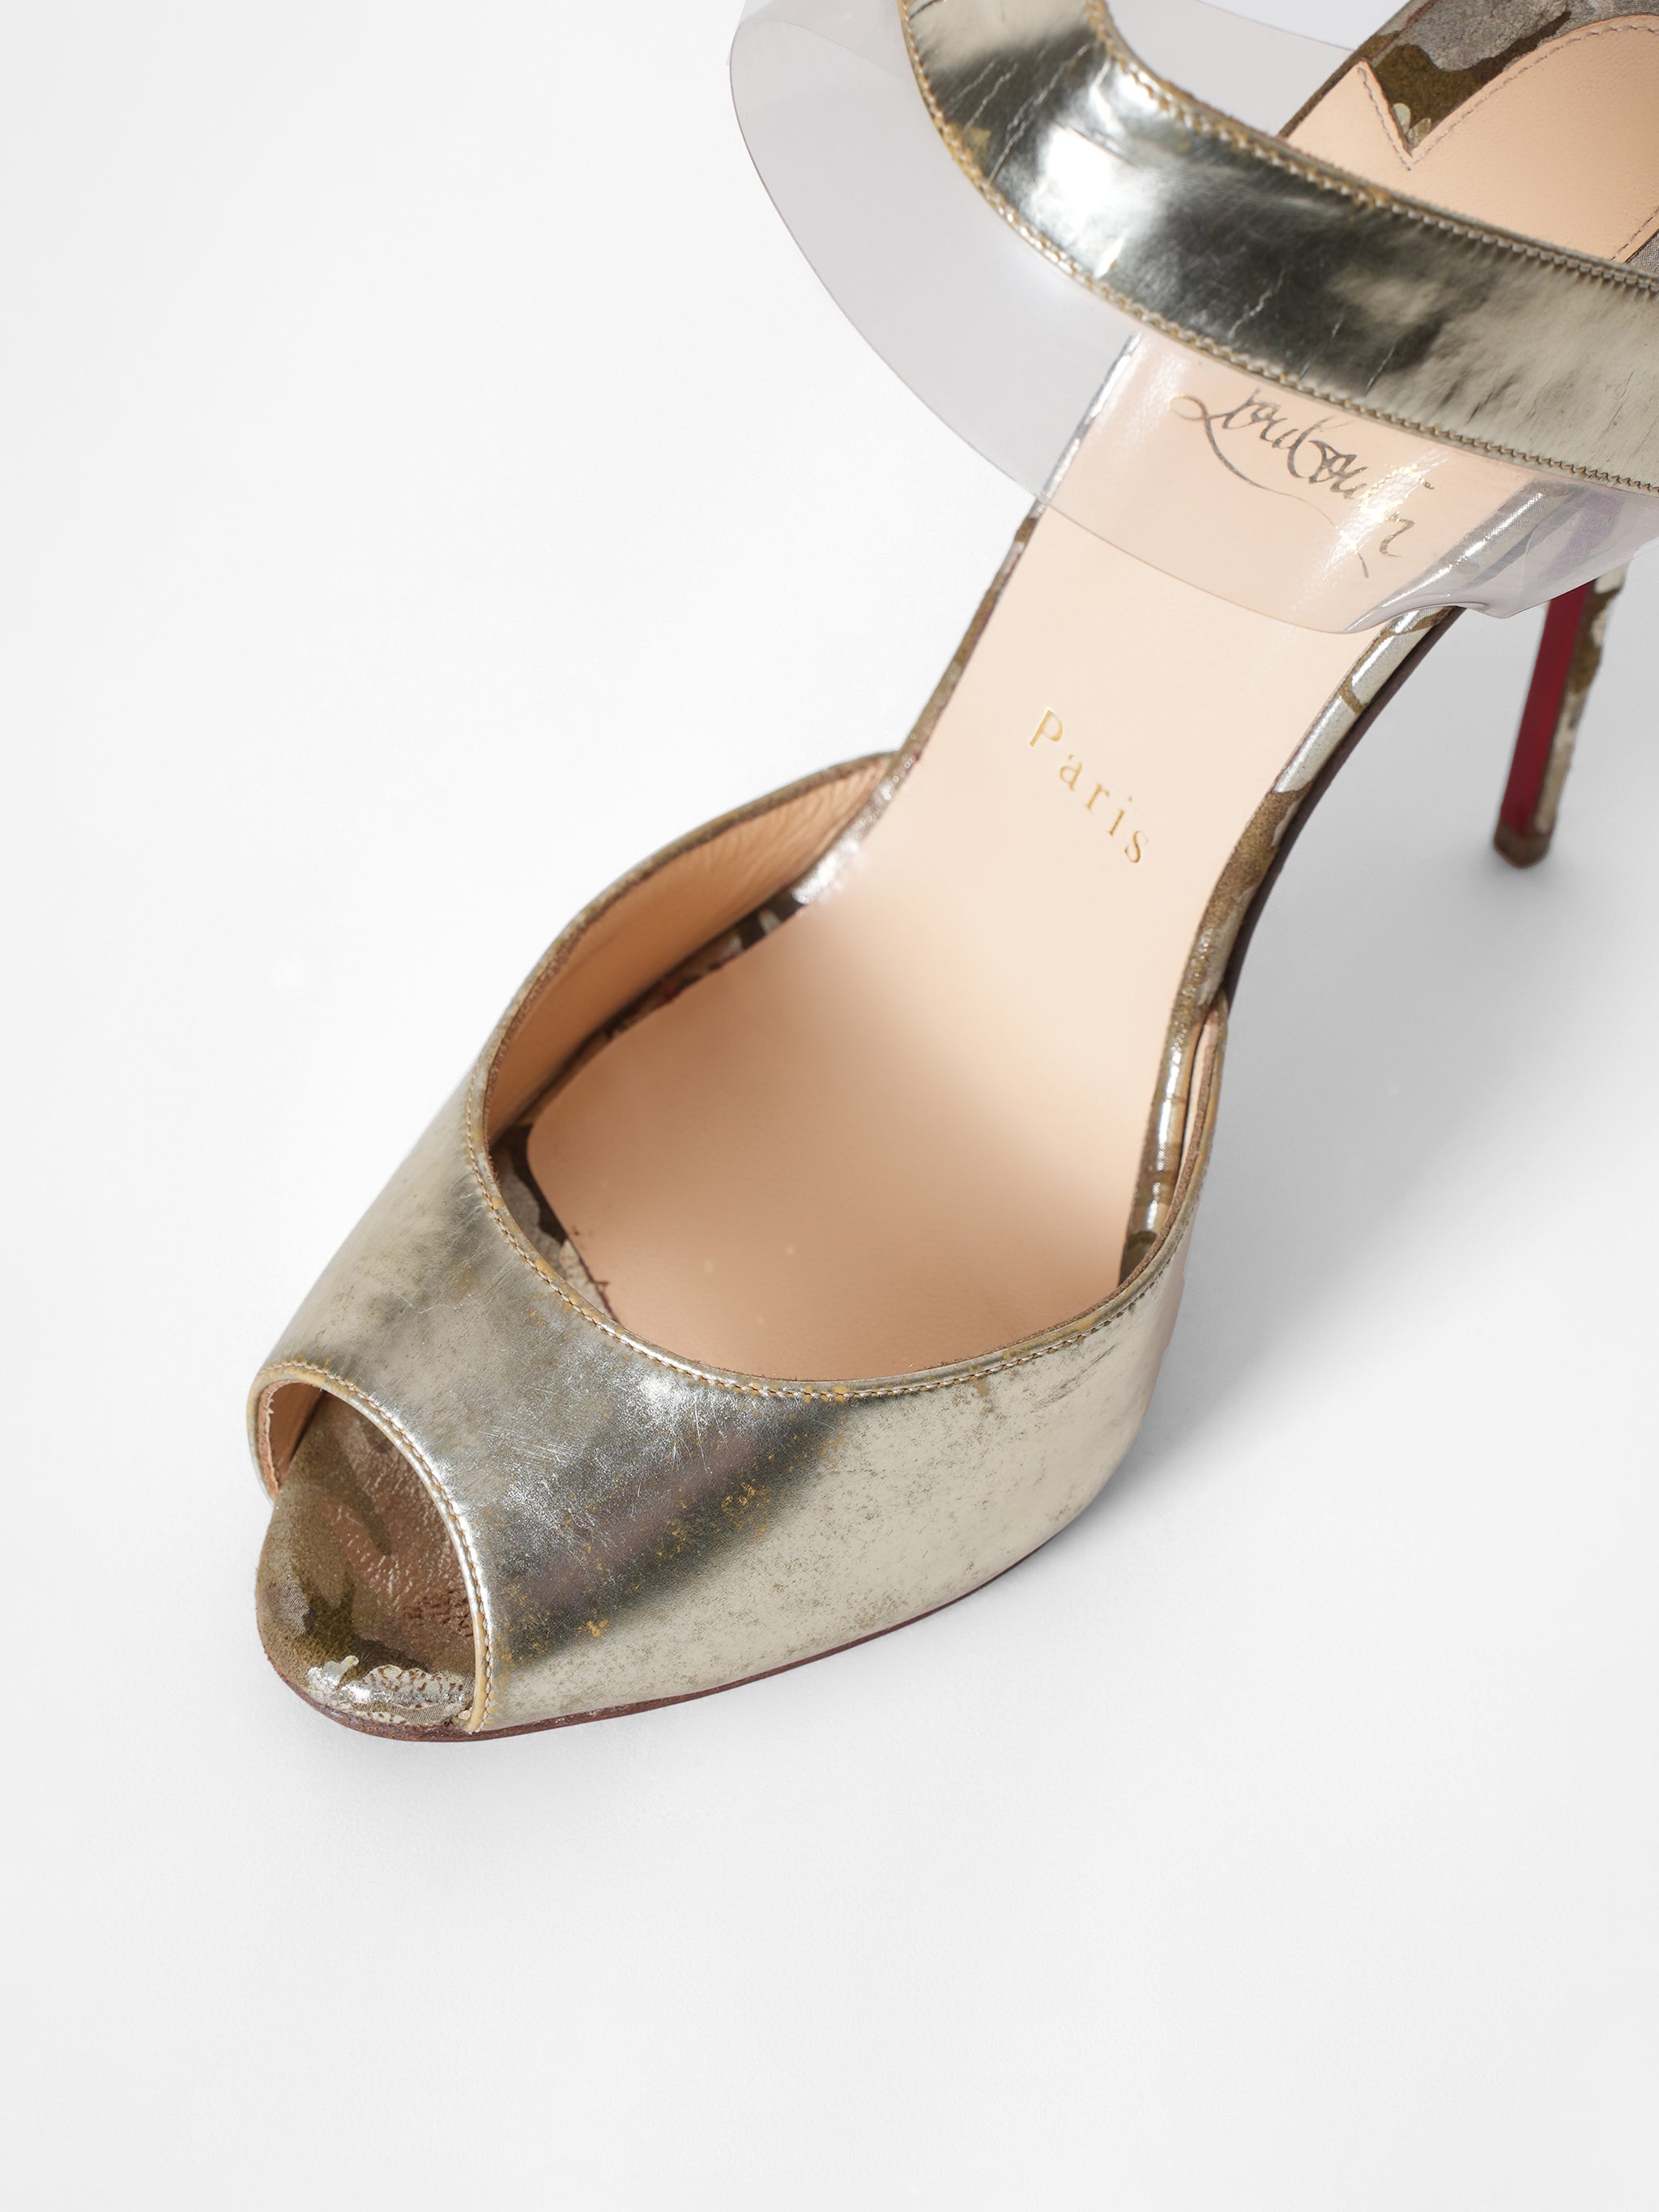 Christian Louboutin Metallic Gold Ankle Strap Camouflage Pumps